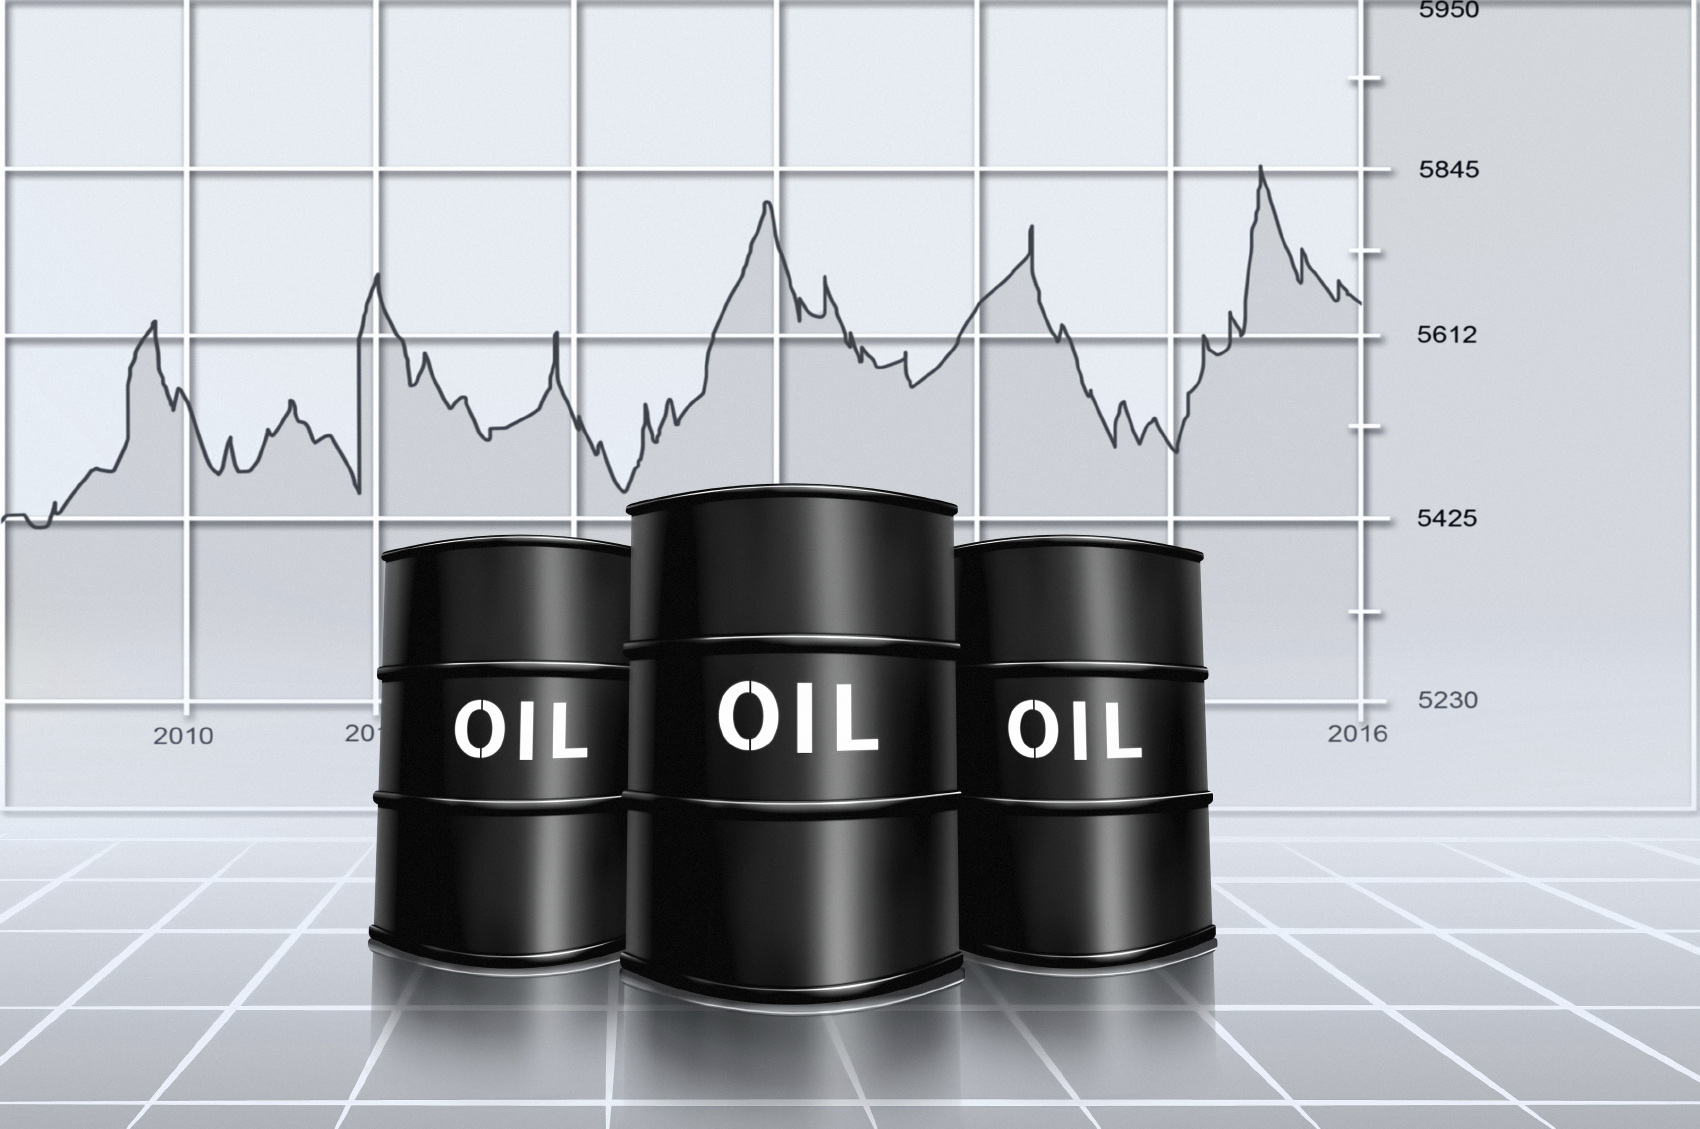 Trading Indicators for Crude Oil